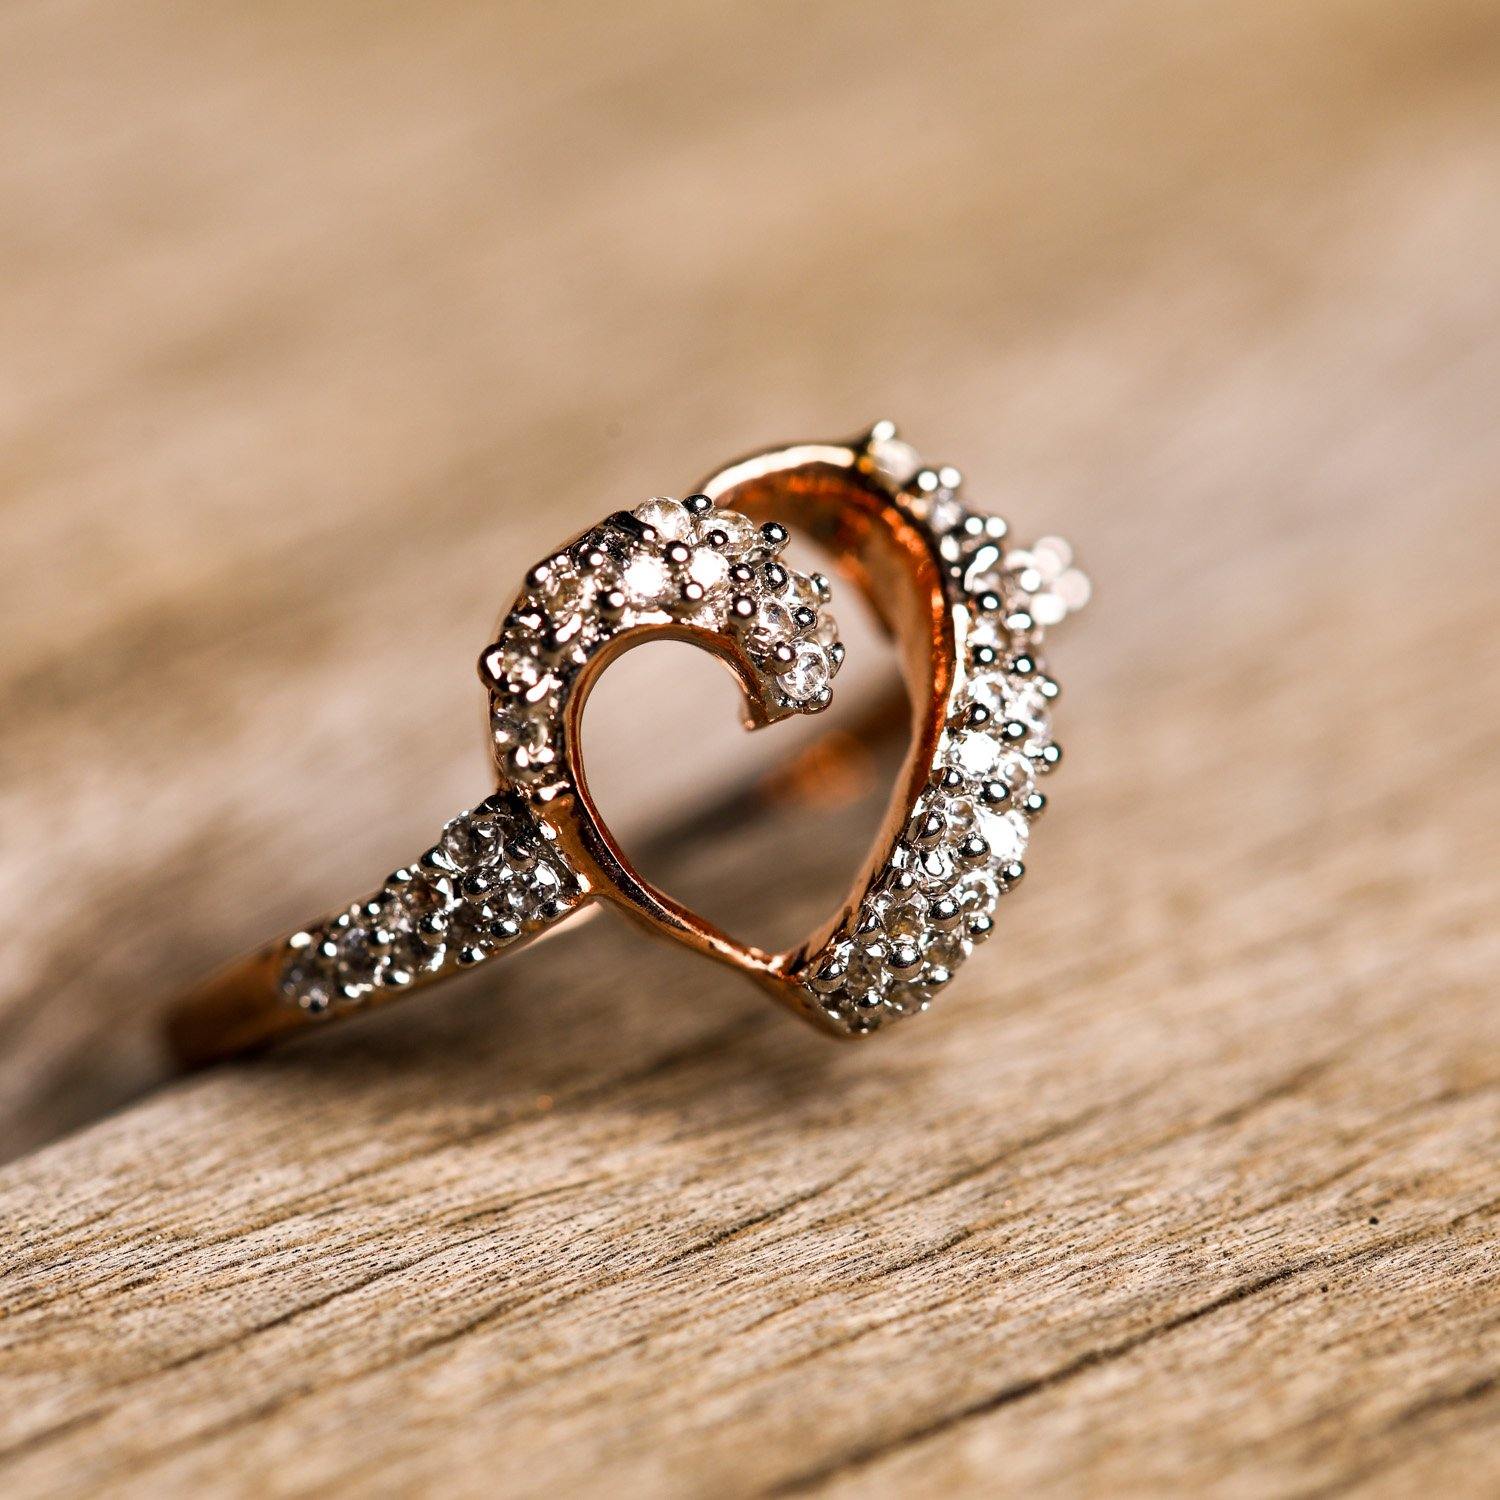 The Dazzling Heart Ring.